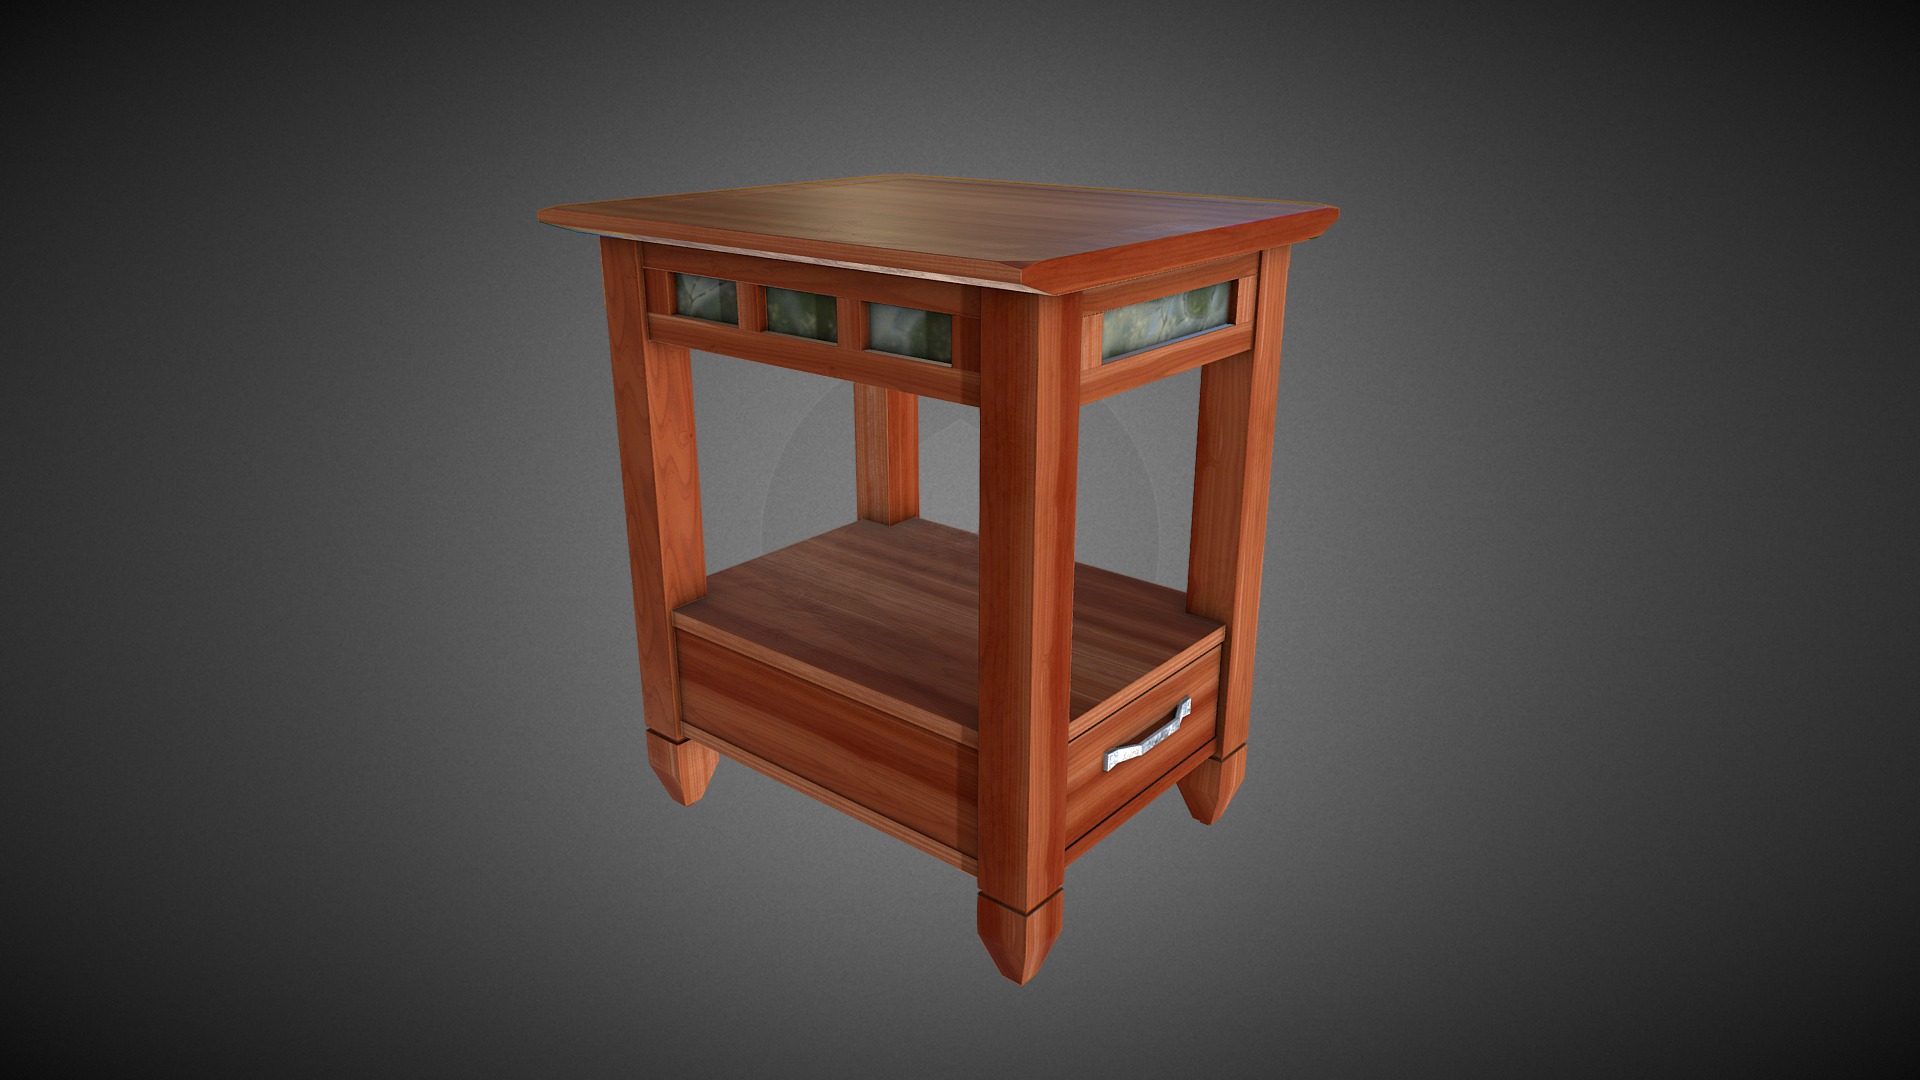 3D model Wooden End Table - This is a 3D model of the Wooden End Table. The 3D model is about a wooden table with a glass top.